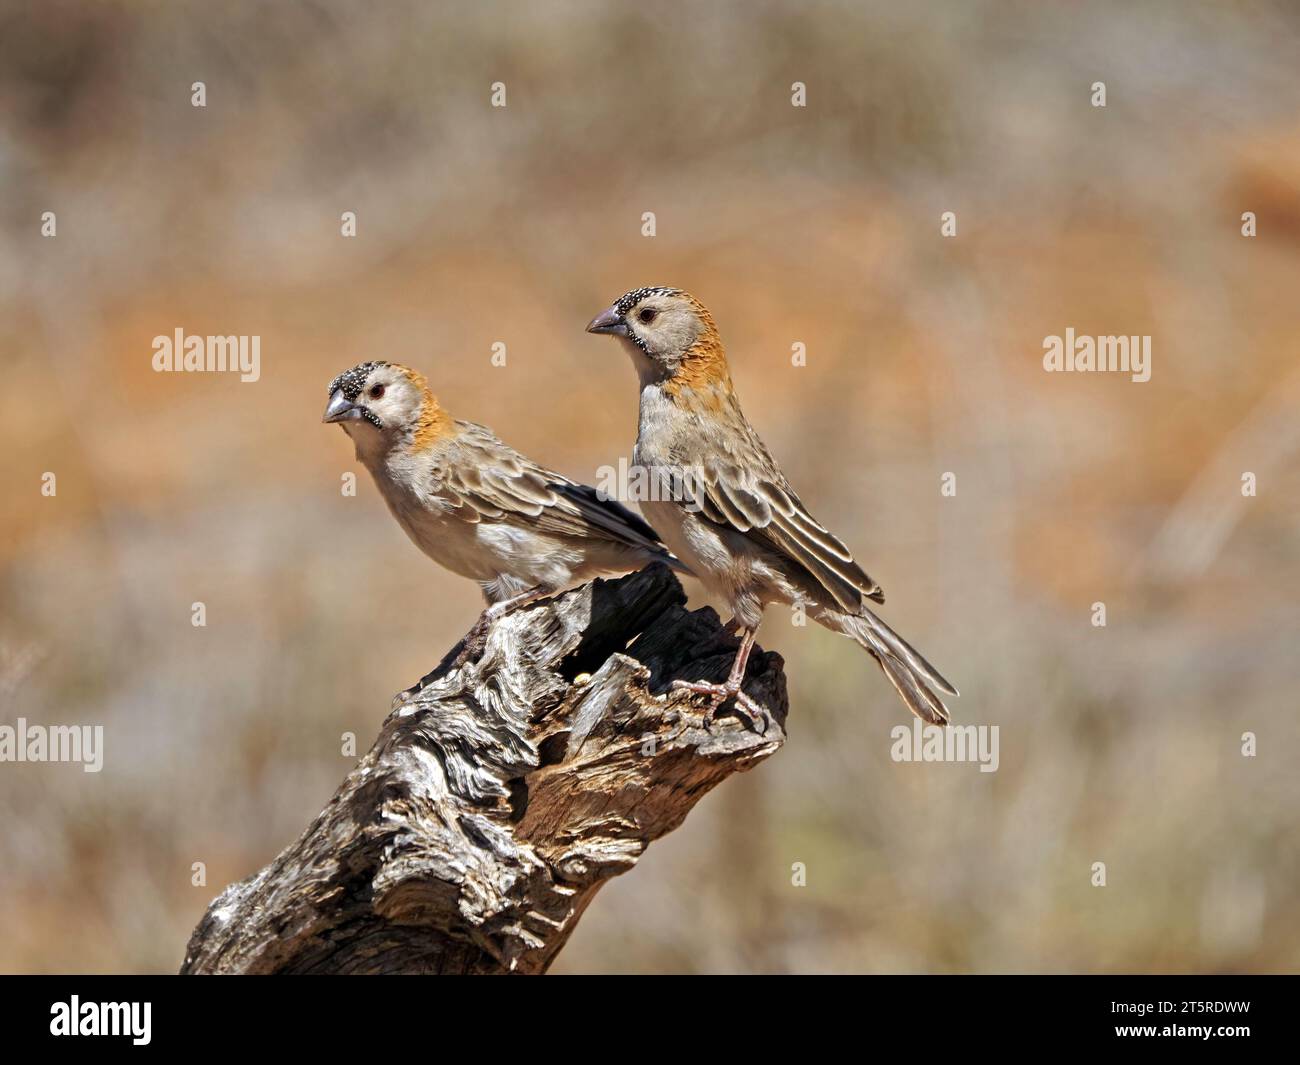 two 2 Speckle-fronted Weavers (Sporopipes frontalis) perched on deadwood tree stump in arid dry bush of Laikiipia County Kenya,Africa Stock Photo